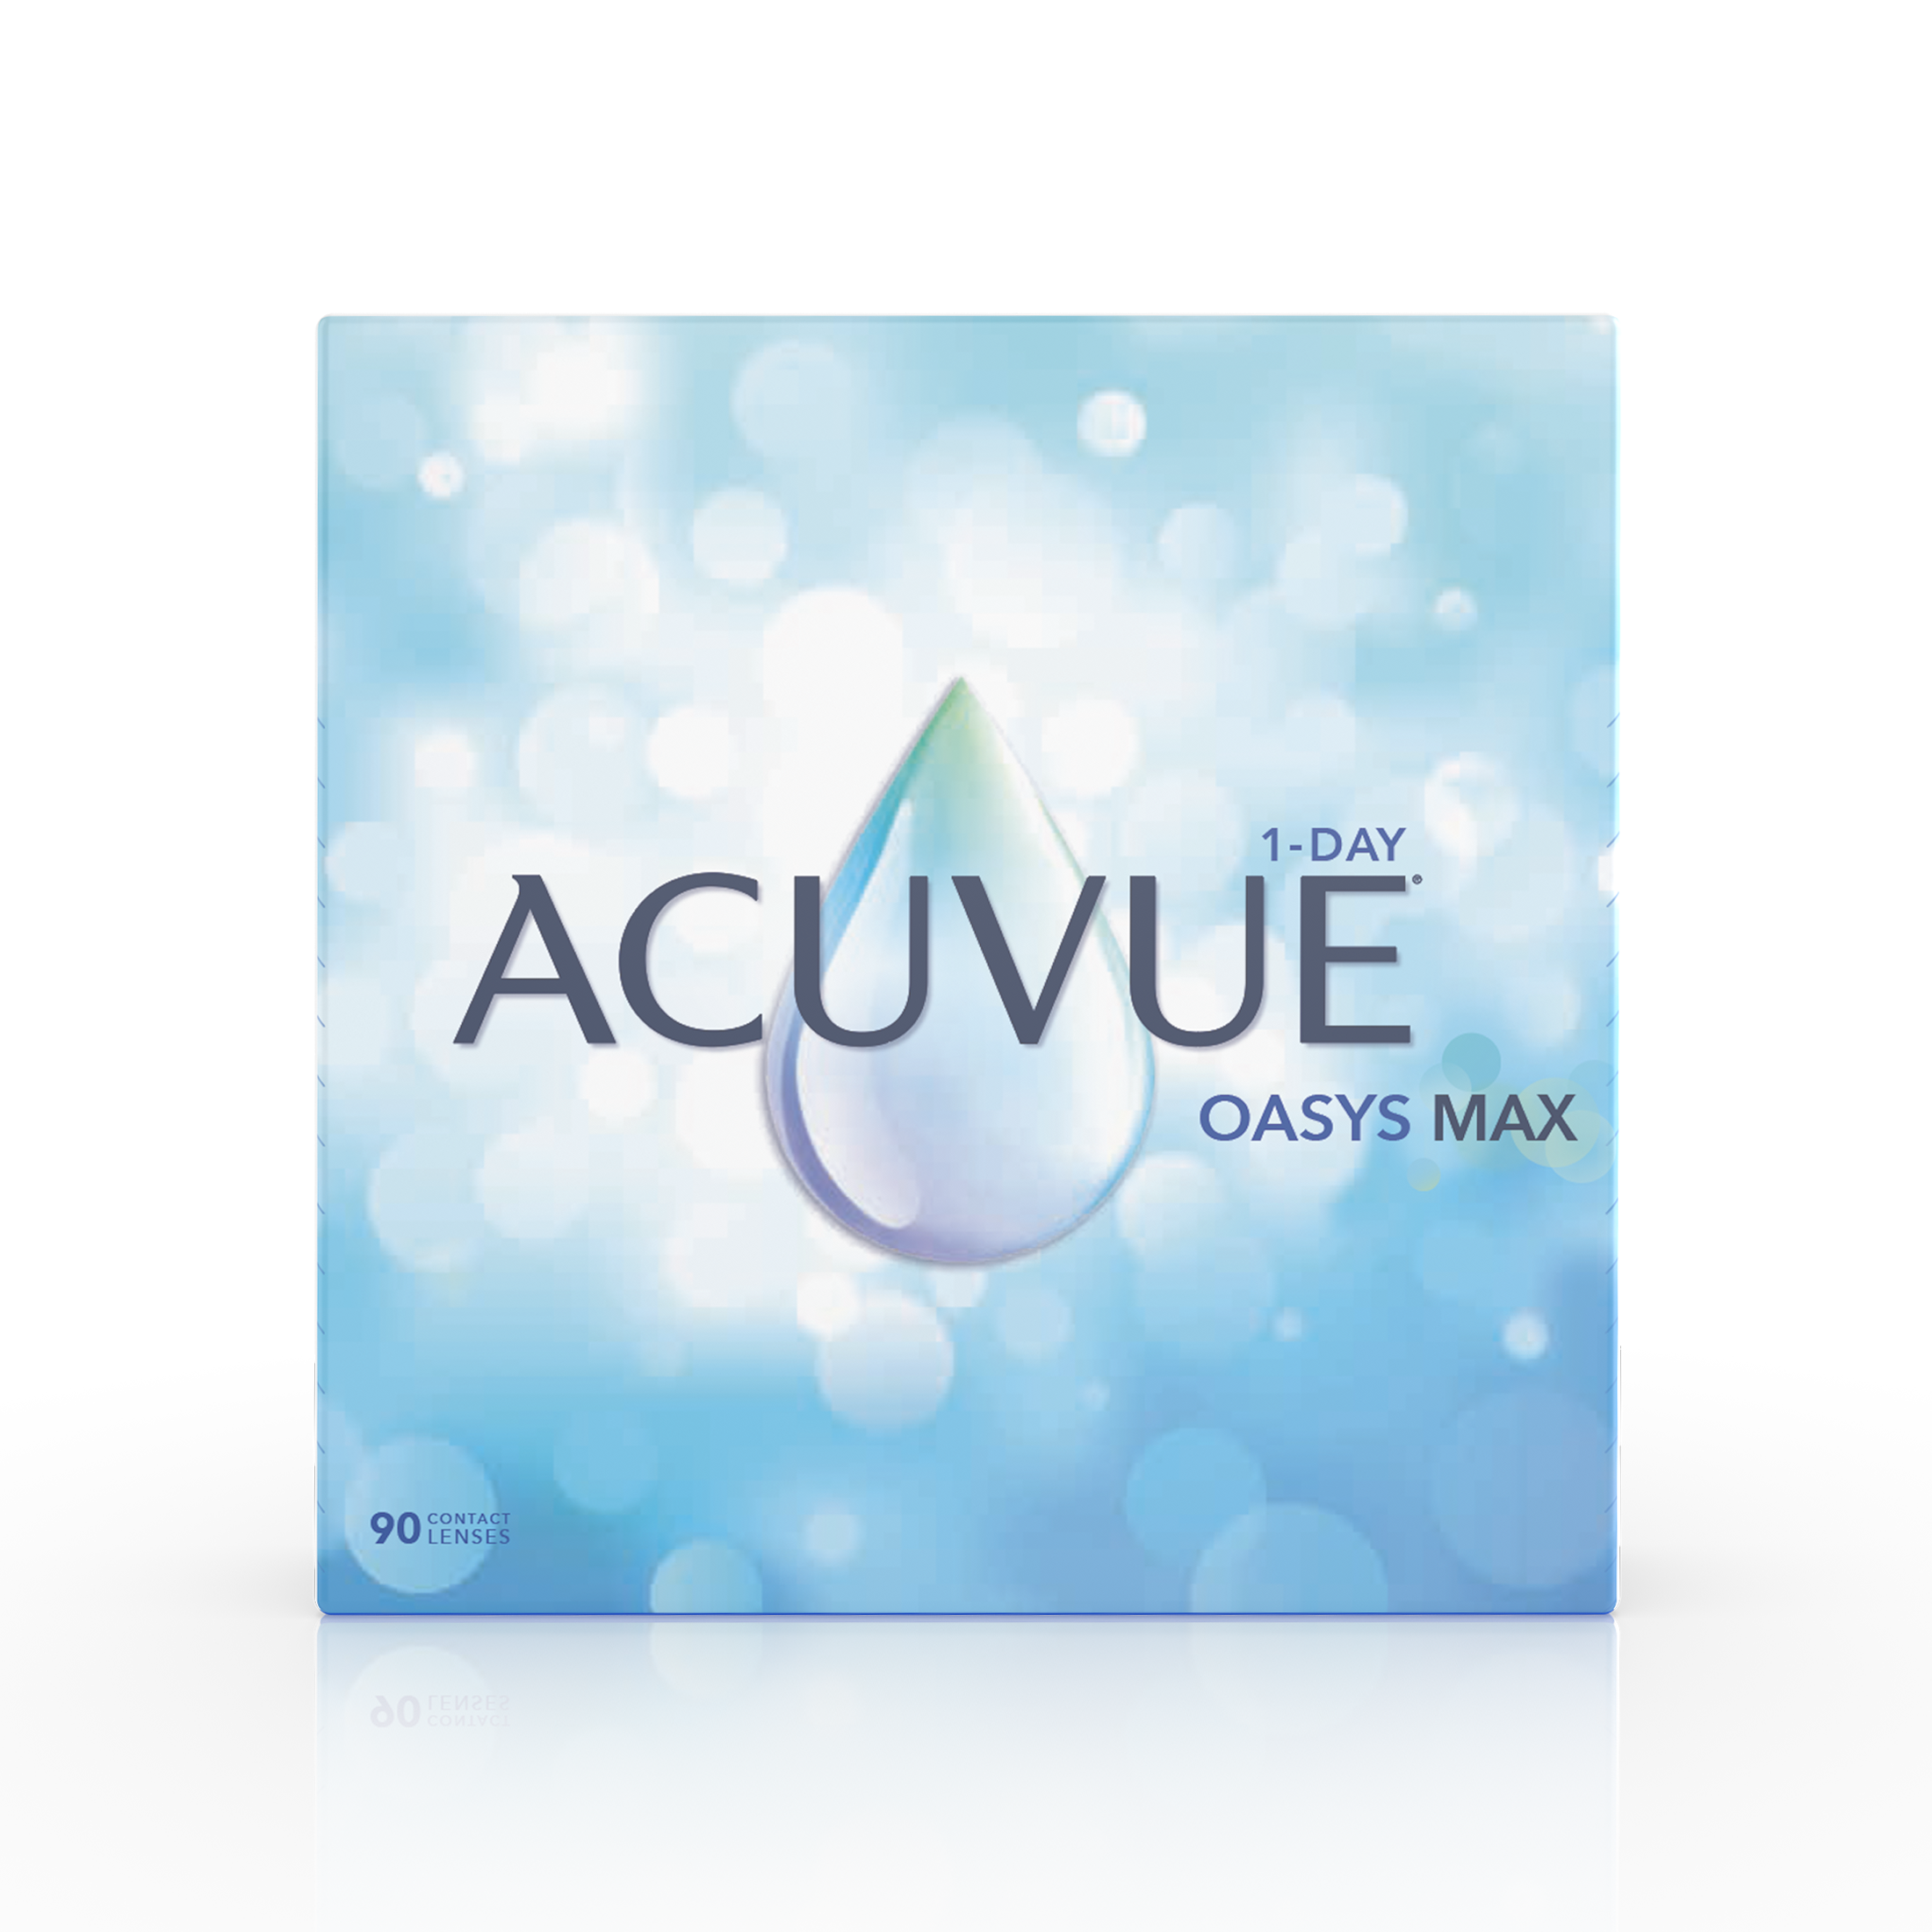 ACUVUE OASYS MAX 1 DAY (90pk) - NEW